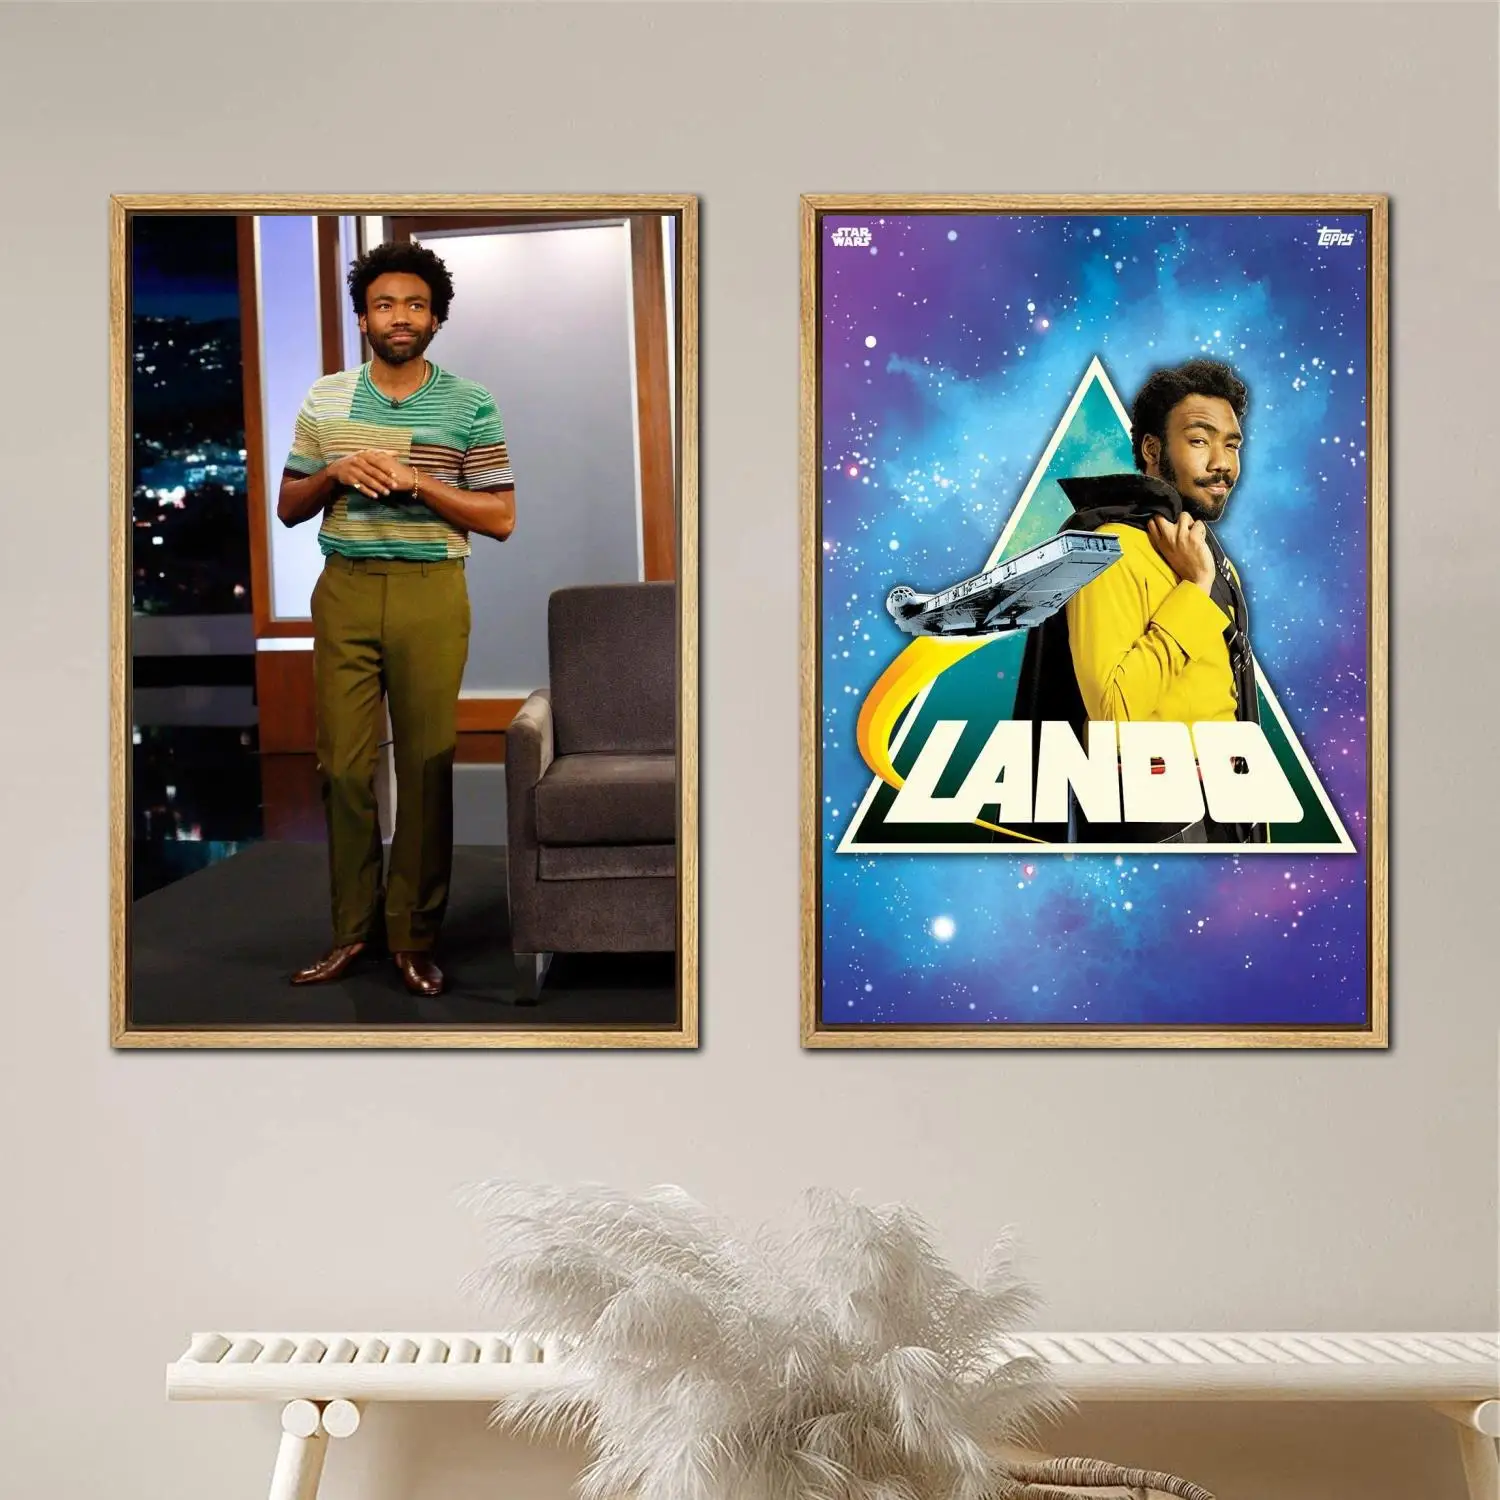 Donald Glover Poster Painting 24x36 Wall Art Canvas Posters room decor Modern Family bedroom Decoration Art wall decor